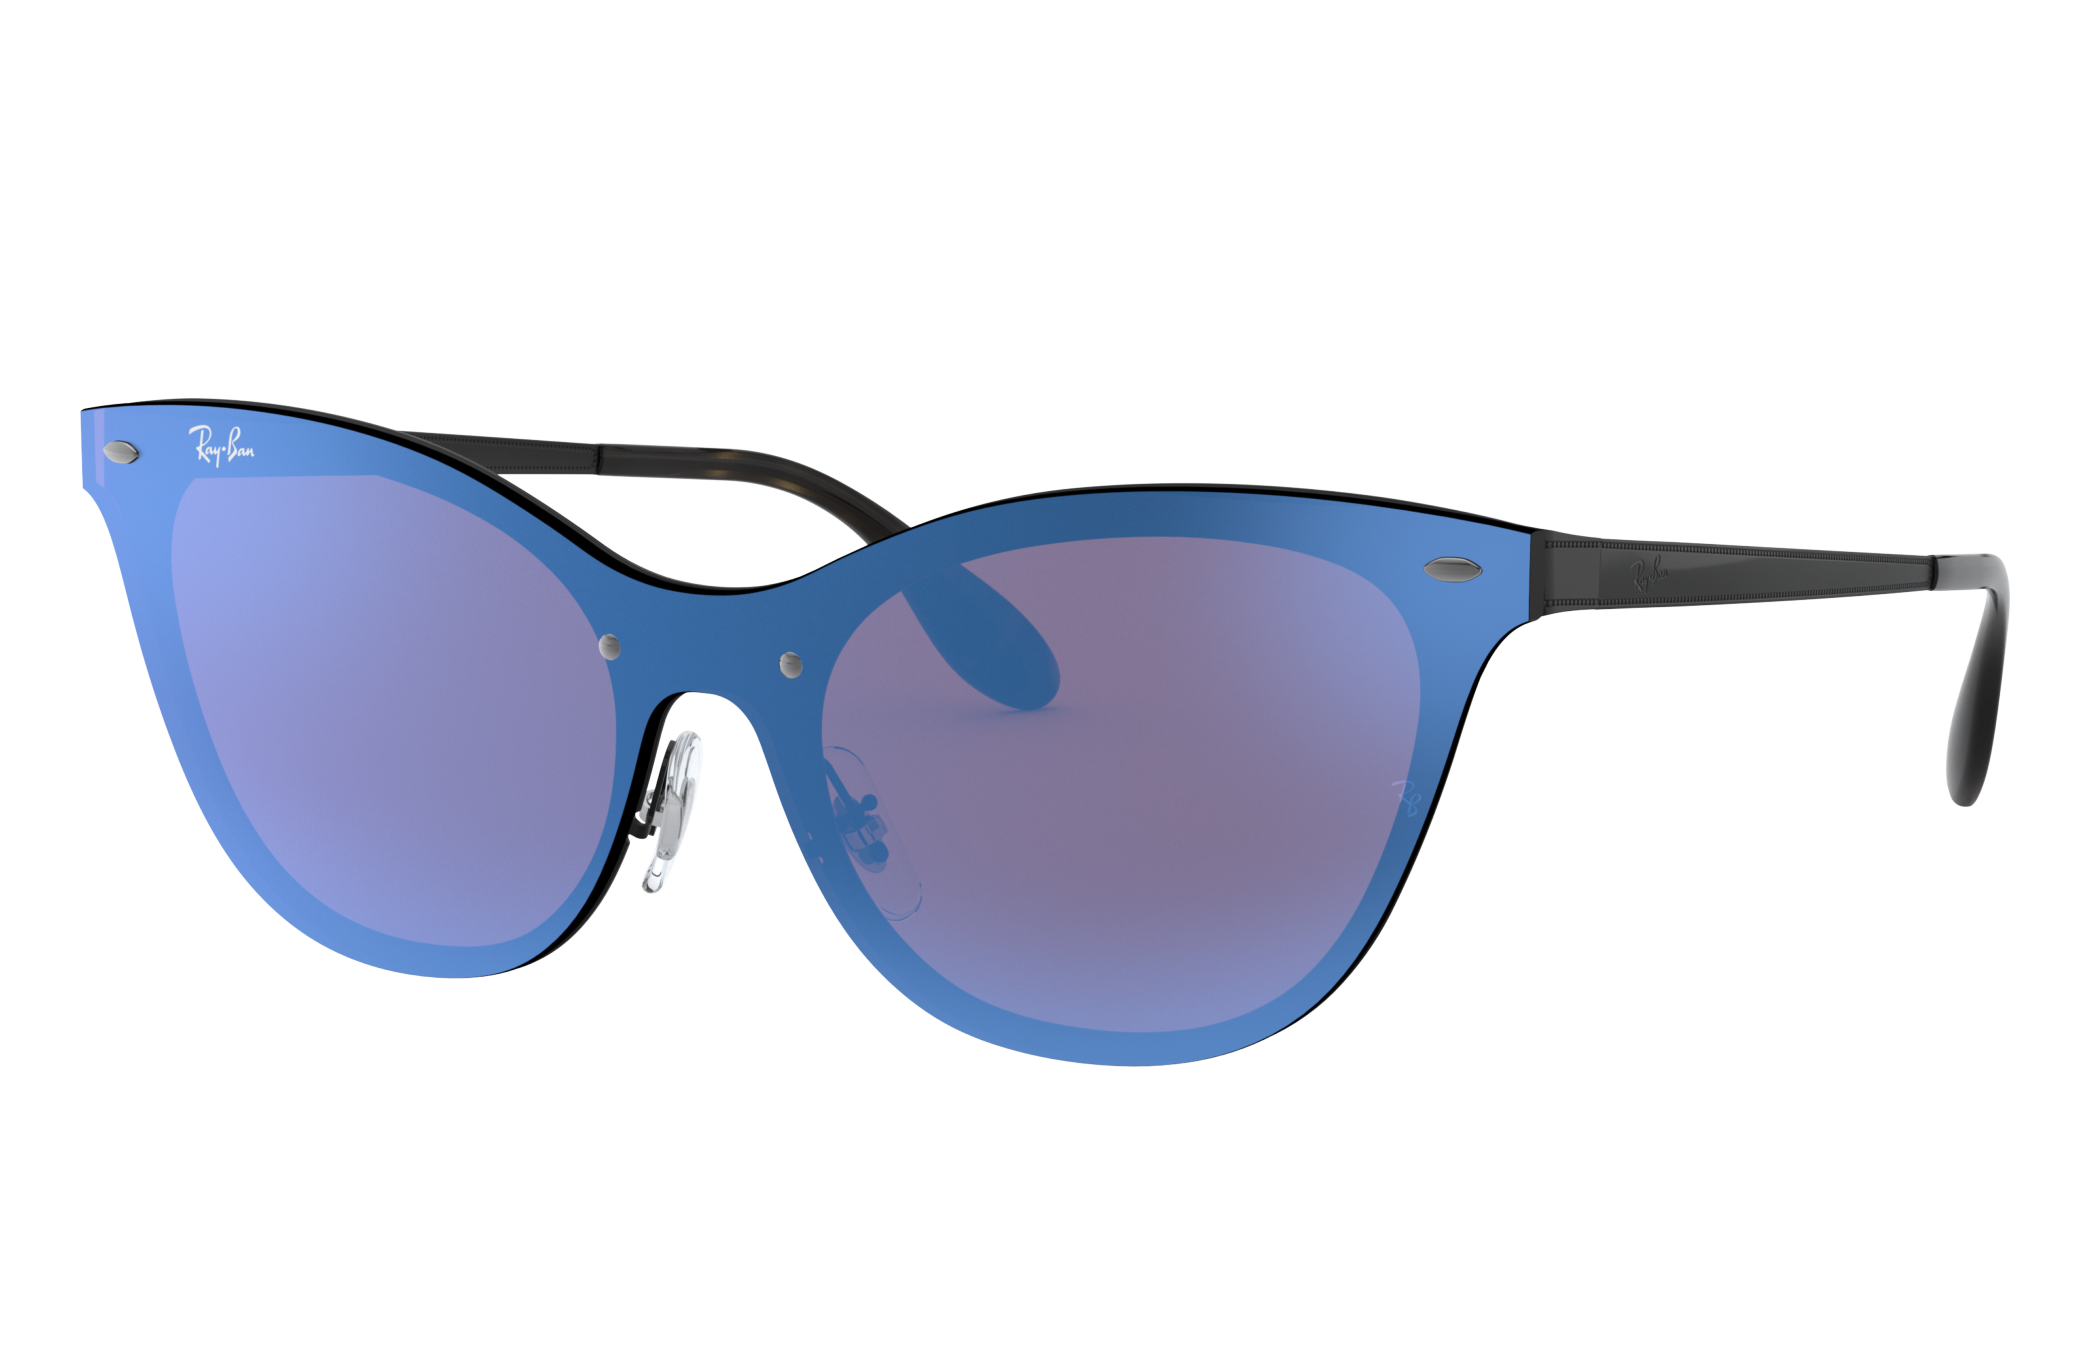 Blaze Cat Eye Sunglasses in Black and Violet/Blue | Ray-Ban®